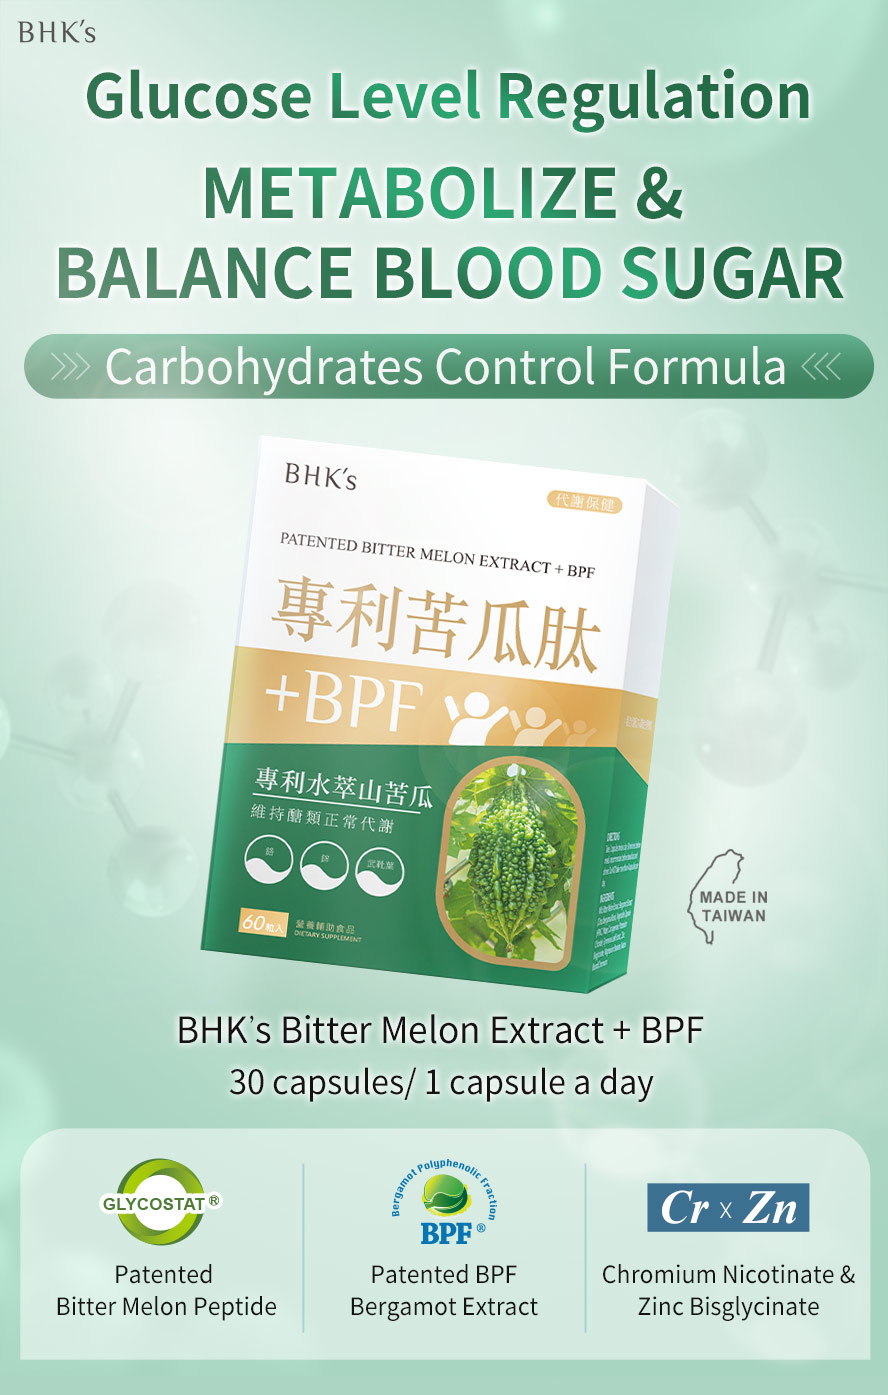 BHK's Bitter Melon Extract+BPF is specialized to balance & control blood sugar, maintain carbohtdrate metabolsim with patented ingredients